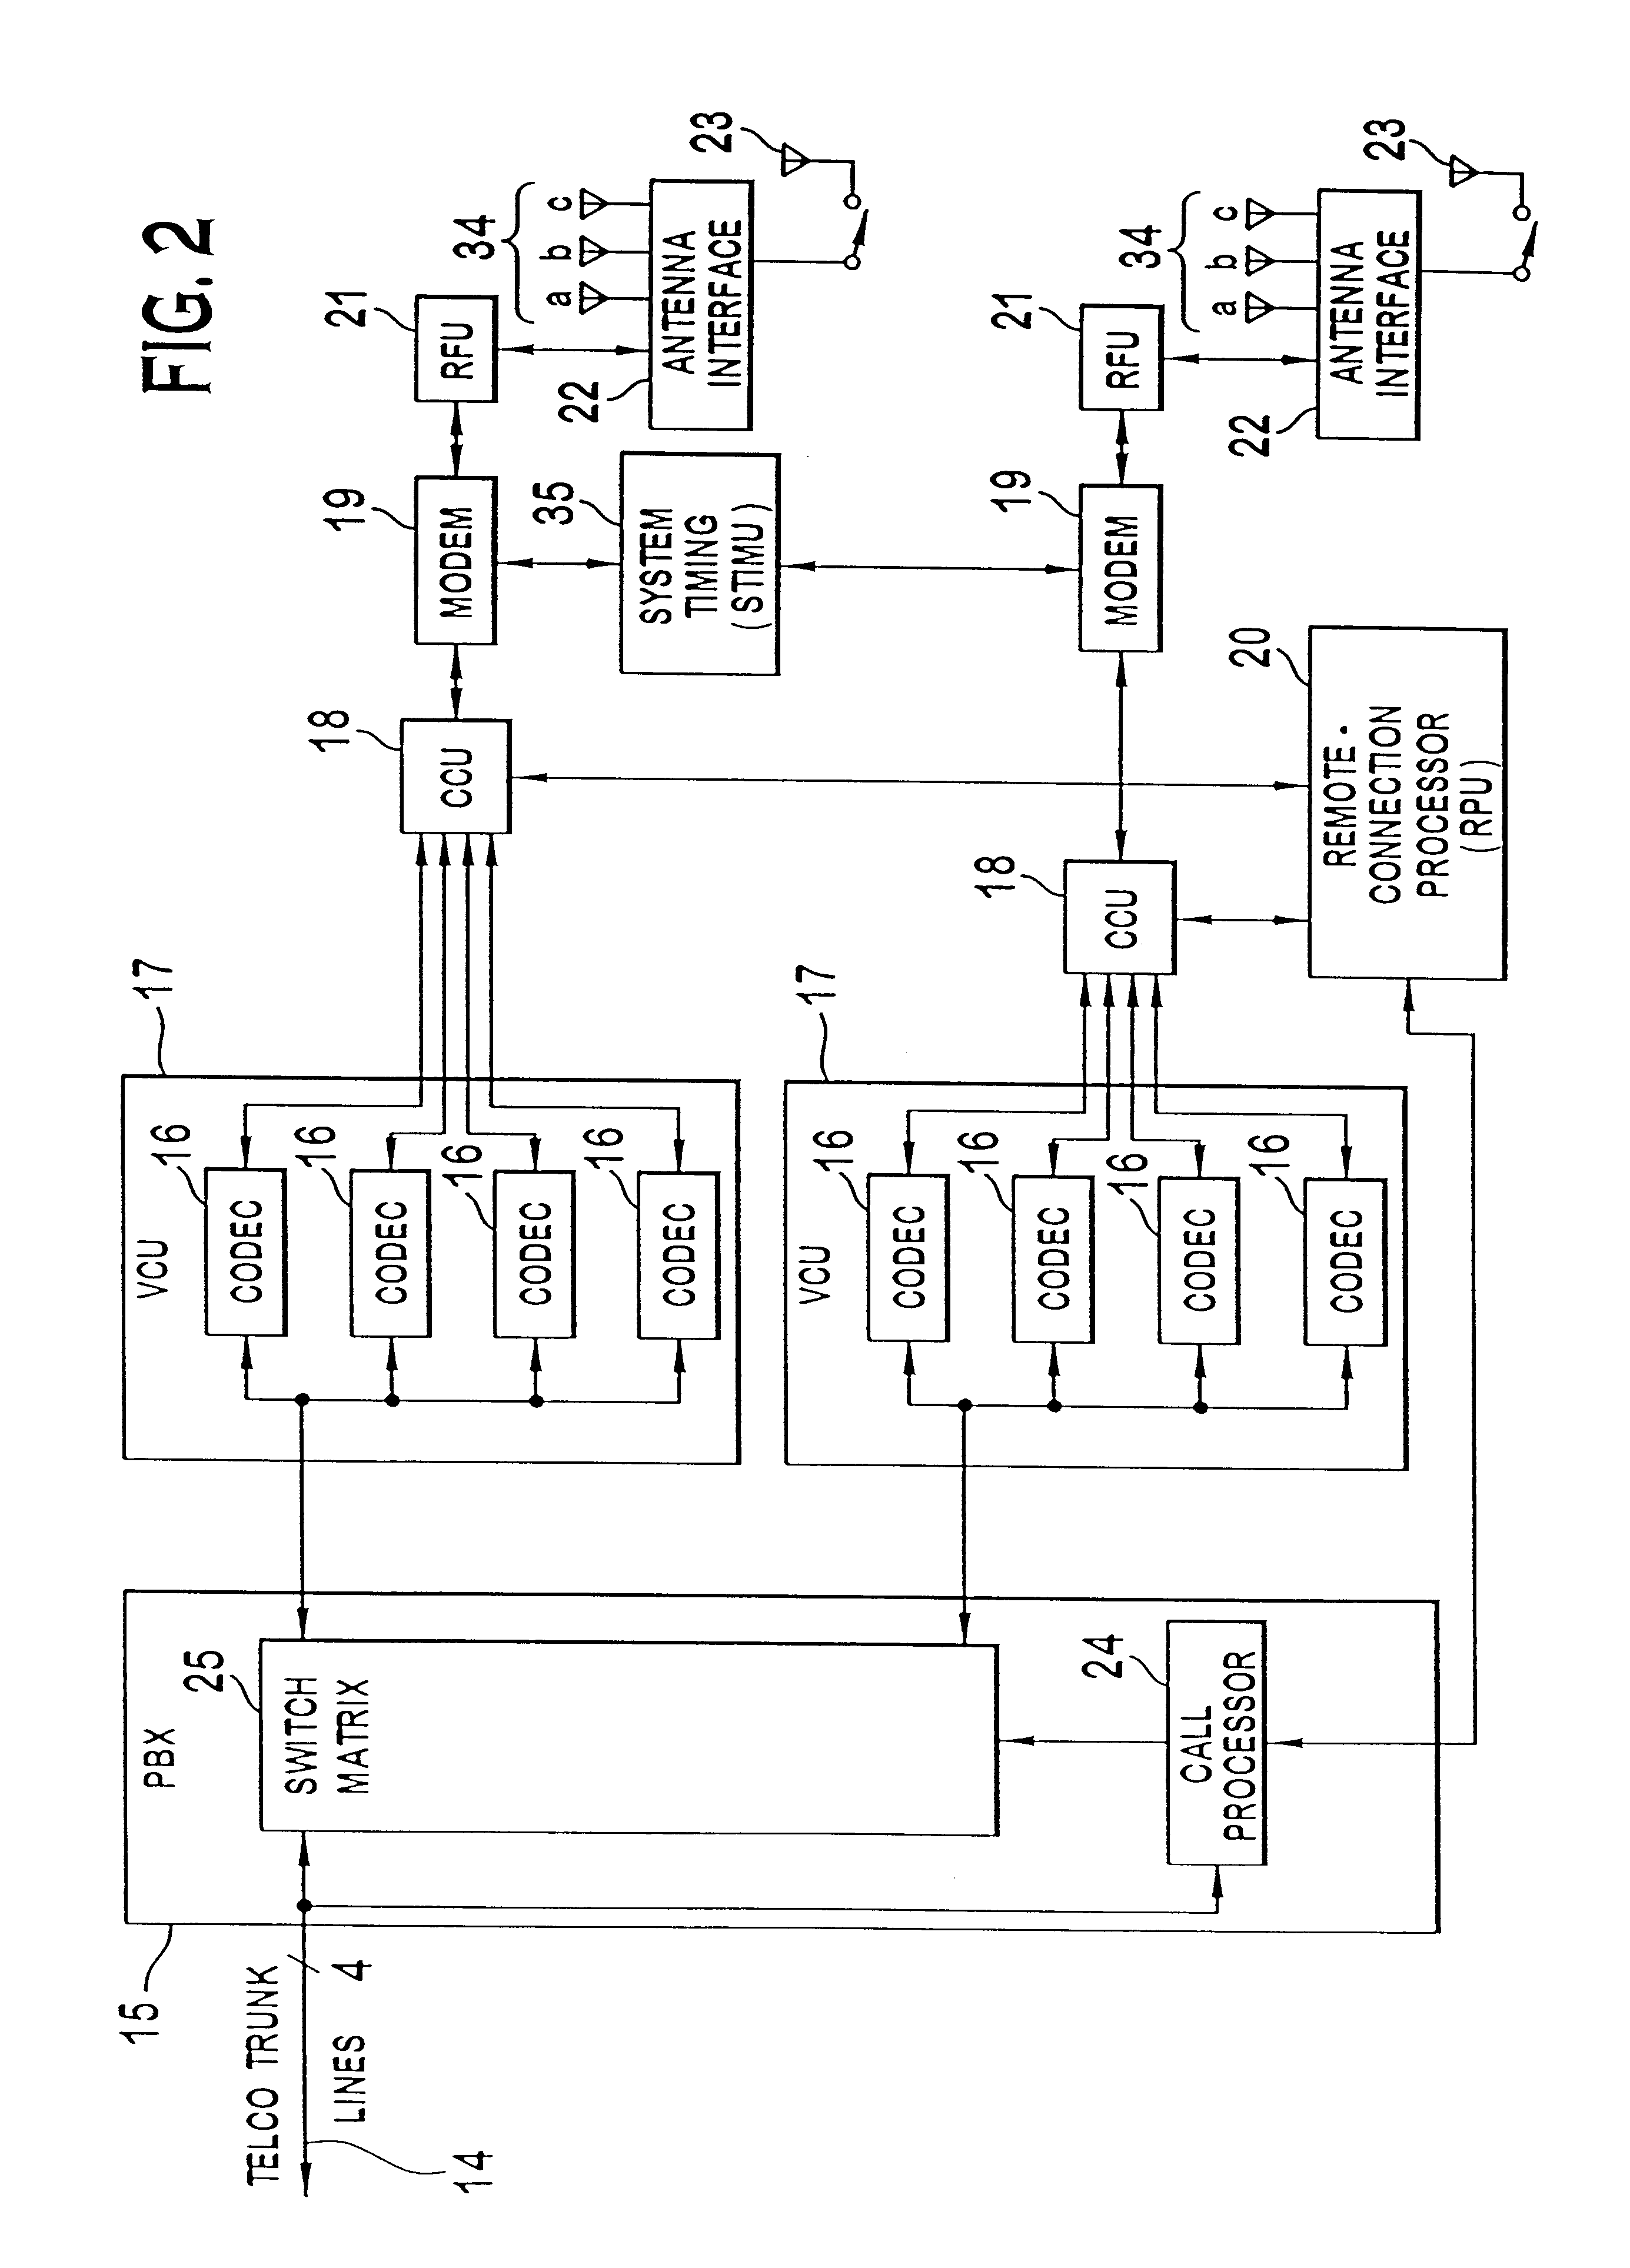 Subscriber RF telephone system for providing multiple speech and/or data signals simultaneously over either a single or a plurality of RF channels